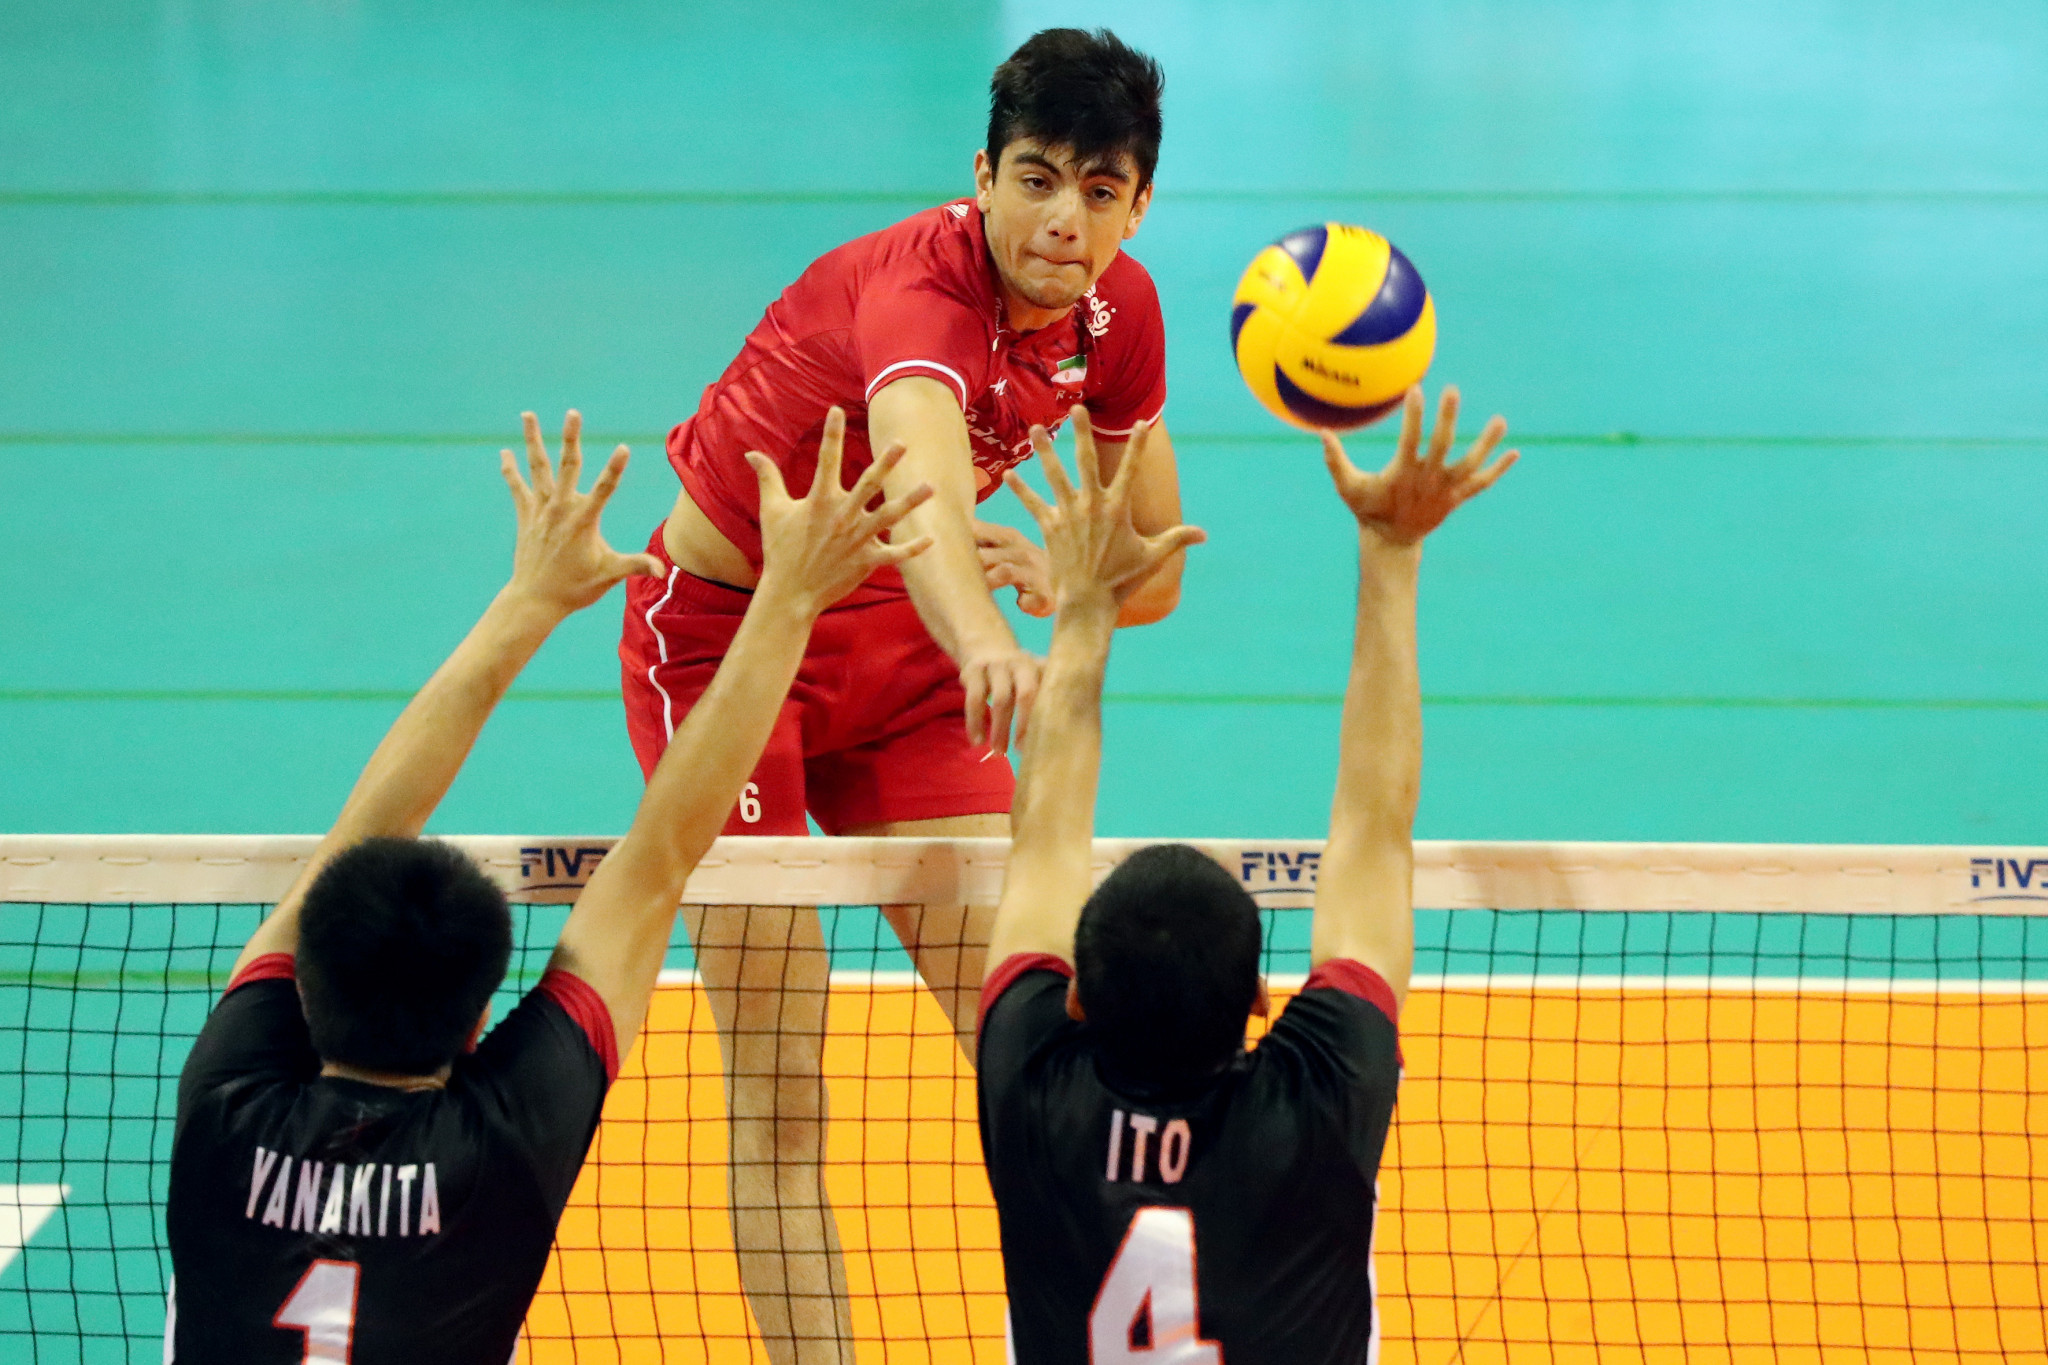 Iran secured fifth place following a victory against Japan ©FIVB